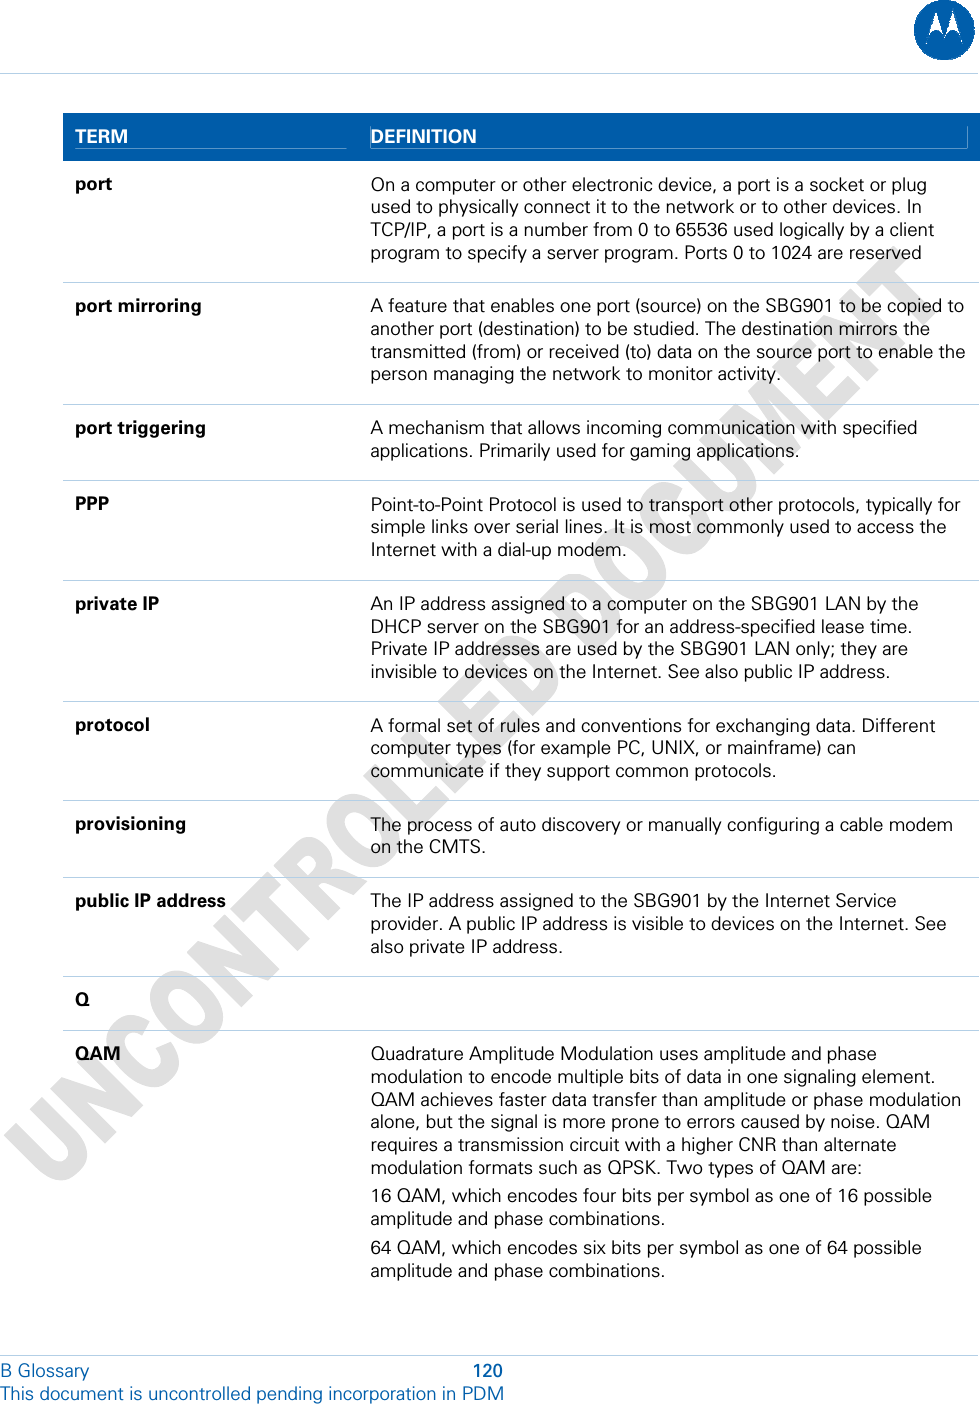  B Glossary  120 This document is uncontrolled pending incorporation in PDM  TERM  DEFINITION port  On a computer or other electronic device, a port is a socket or plug used to physically connect it to the network or to other devices. In TCP/IP, a port is a number from 0 to 65536 used logically by a client program to specify a server program. Ports 0 to 1024 are reserved port mirroring  A feature that enables one port (source) on the SBG901 to be copied to another port (destination) to be studied. The destination mirrors the transmitted (from) or received (to) data on the source port to enable the person managing the network to monitor activity. port triggering  A mechanism that allows incoming communication with specified applications. Primarily used for gaming applications. PPP  Point-to-Point Protocol is used to transport other protocols, typically for simple links over serial lines. It is most commonly used to access the Internet with a dial-up modem. private IP  An IP address assigned to a computer on the SBG901 LAN by the DHCP server on the SBG901 for an address-specified lease time. Private IP addresses are used by the SBG901 LAN only; they are invisible to devices on the Internet. See also public IP address. protocol  A formal set of rules and conventions for exchanging data. Different computer types (for example PC, UNIX, or mainframe) can communicate if they support common protocols. provisioning  The process of auto discovery or manually configuring a cable modem on the CMTS. public IP address  The IP address assigned to the SBG901 by the Internet Service provider. A public IP address is visible to devices on the Internet. See also private IP address. Q   QAM  Quadrature Amplitude Modulation uses amplitude and phase modulation to encode multiple bits of data in one signaling element. QAM achieves faster data transfer than amplitude or phase modulation alone, but the signal is more prone to errors caused by noise. QAM requires a transmission circuit with a higher CNR than alternate modulation formats such as QPSK. Two types of QAM are: 16 QAM, which encodes four bits per symbol as one of 16 possible amplitude and phase combinations. 64 QAM, which encodes six bits per symbol as one of 64 possible amplitude and phase combinations. 